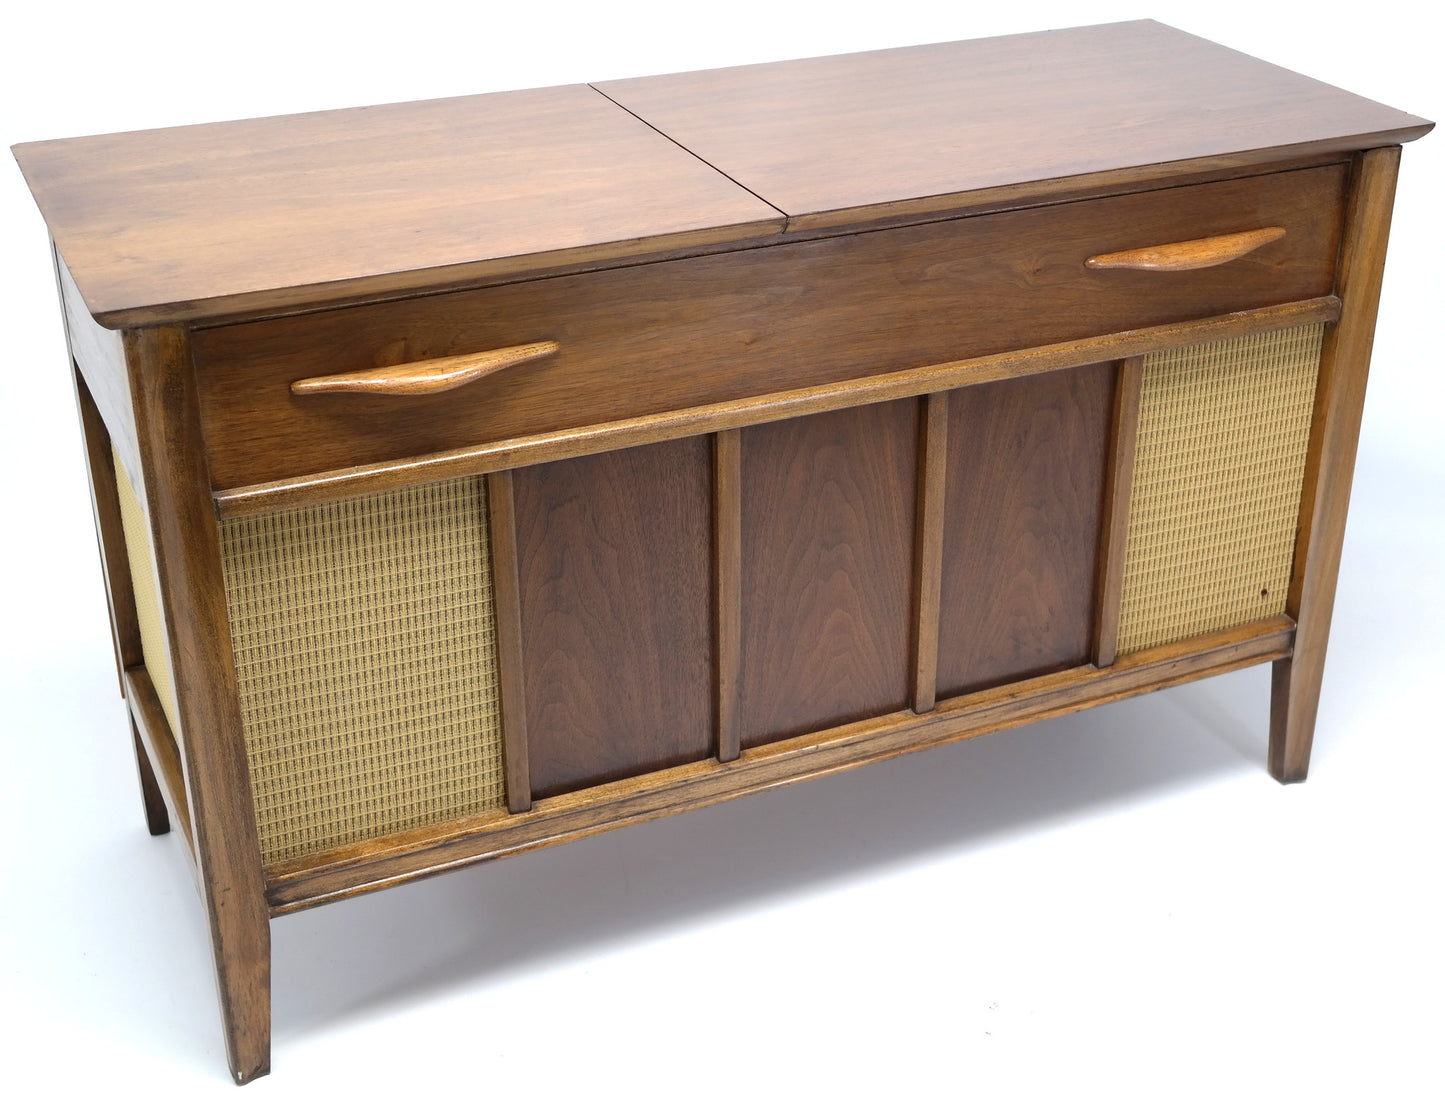 Mid Century Modern STEREO CONSOLE - 60's - Record Player - Bluetooth - AM FM Tuner The Vintedge Co.